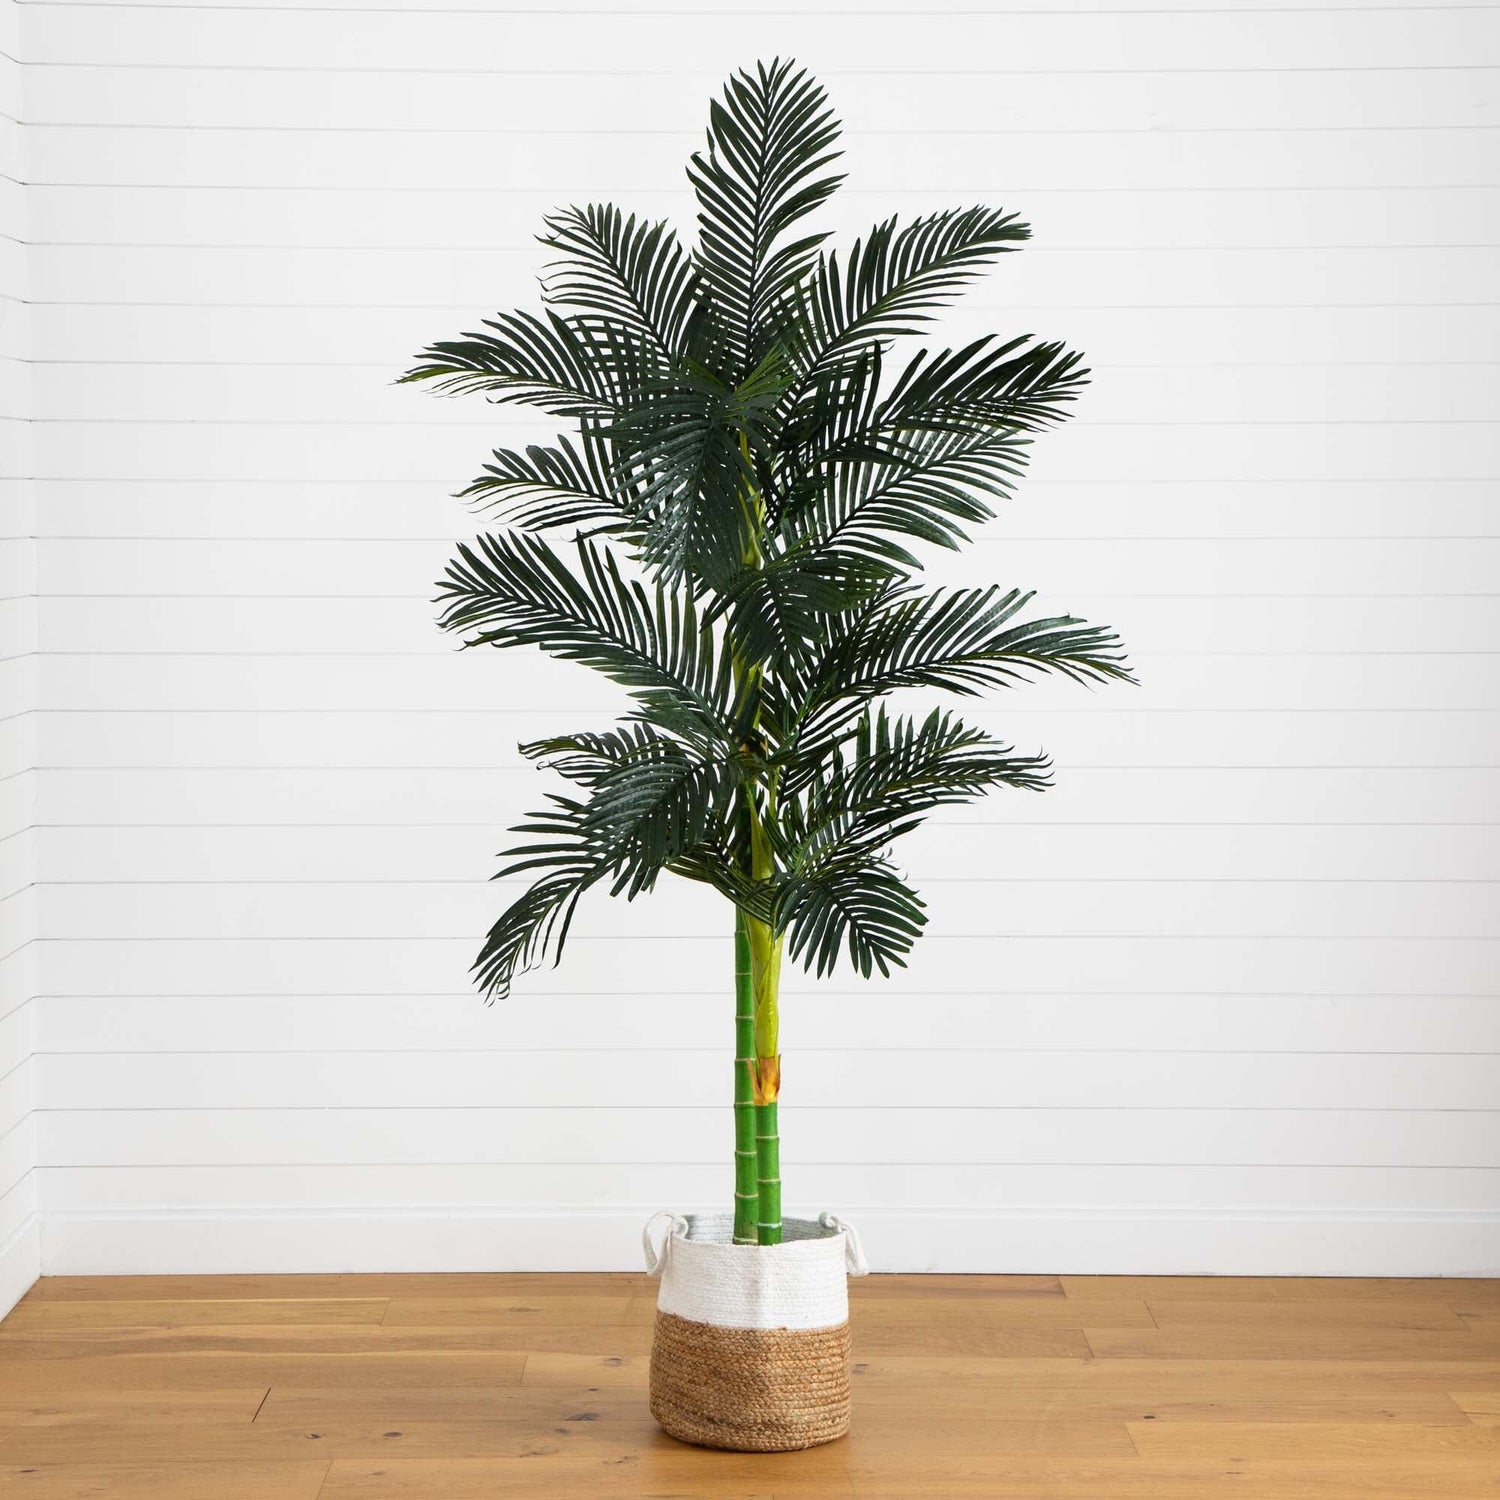 8’ Golden Cane Artificial Palm Tree in Handmade Natural Cotton Planter